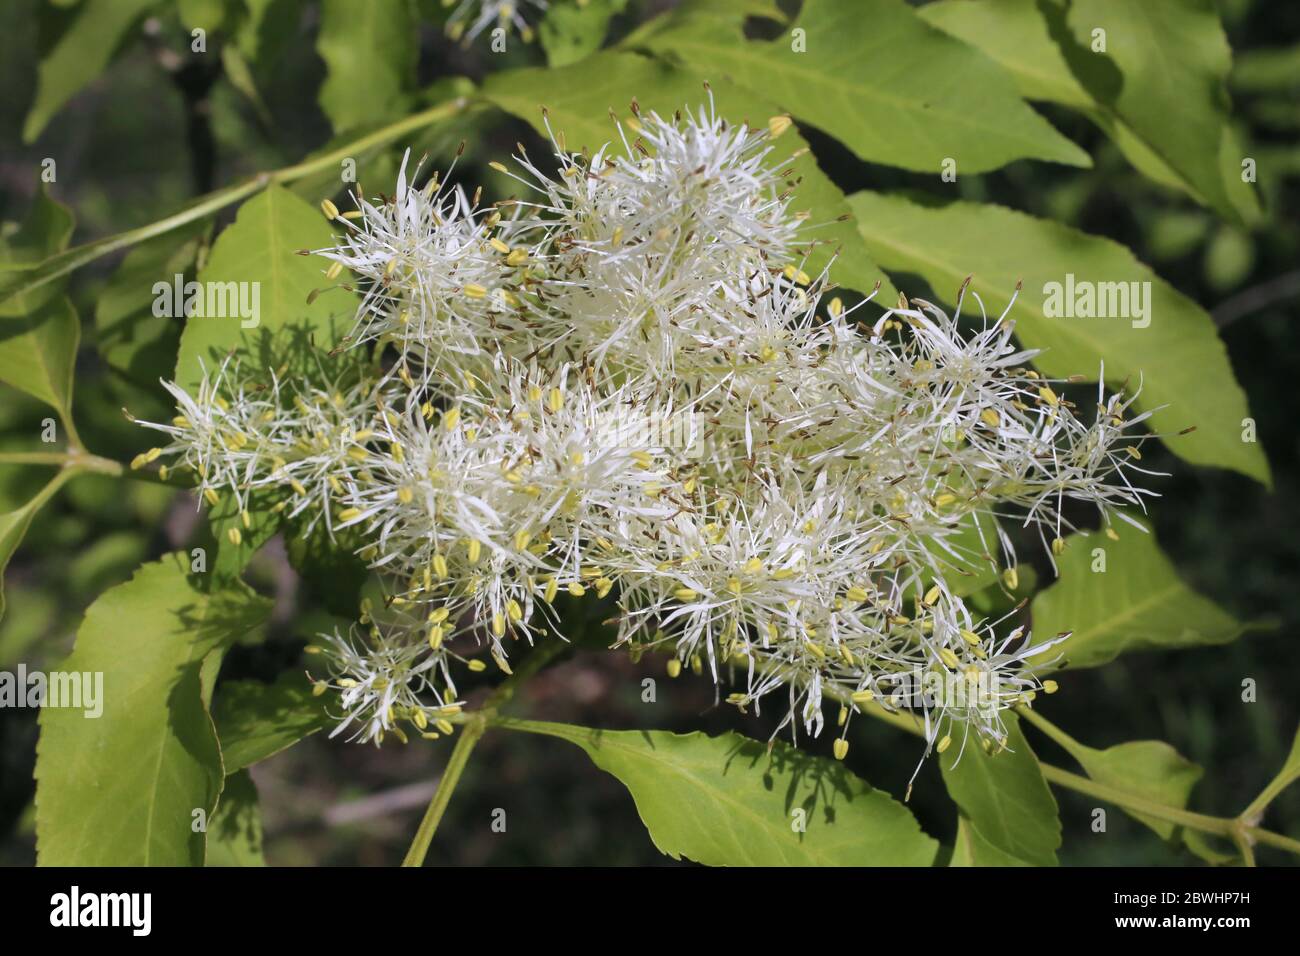 Manna Plant High Resolution Stock Photography and Images - Alamy